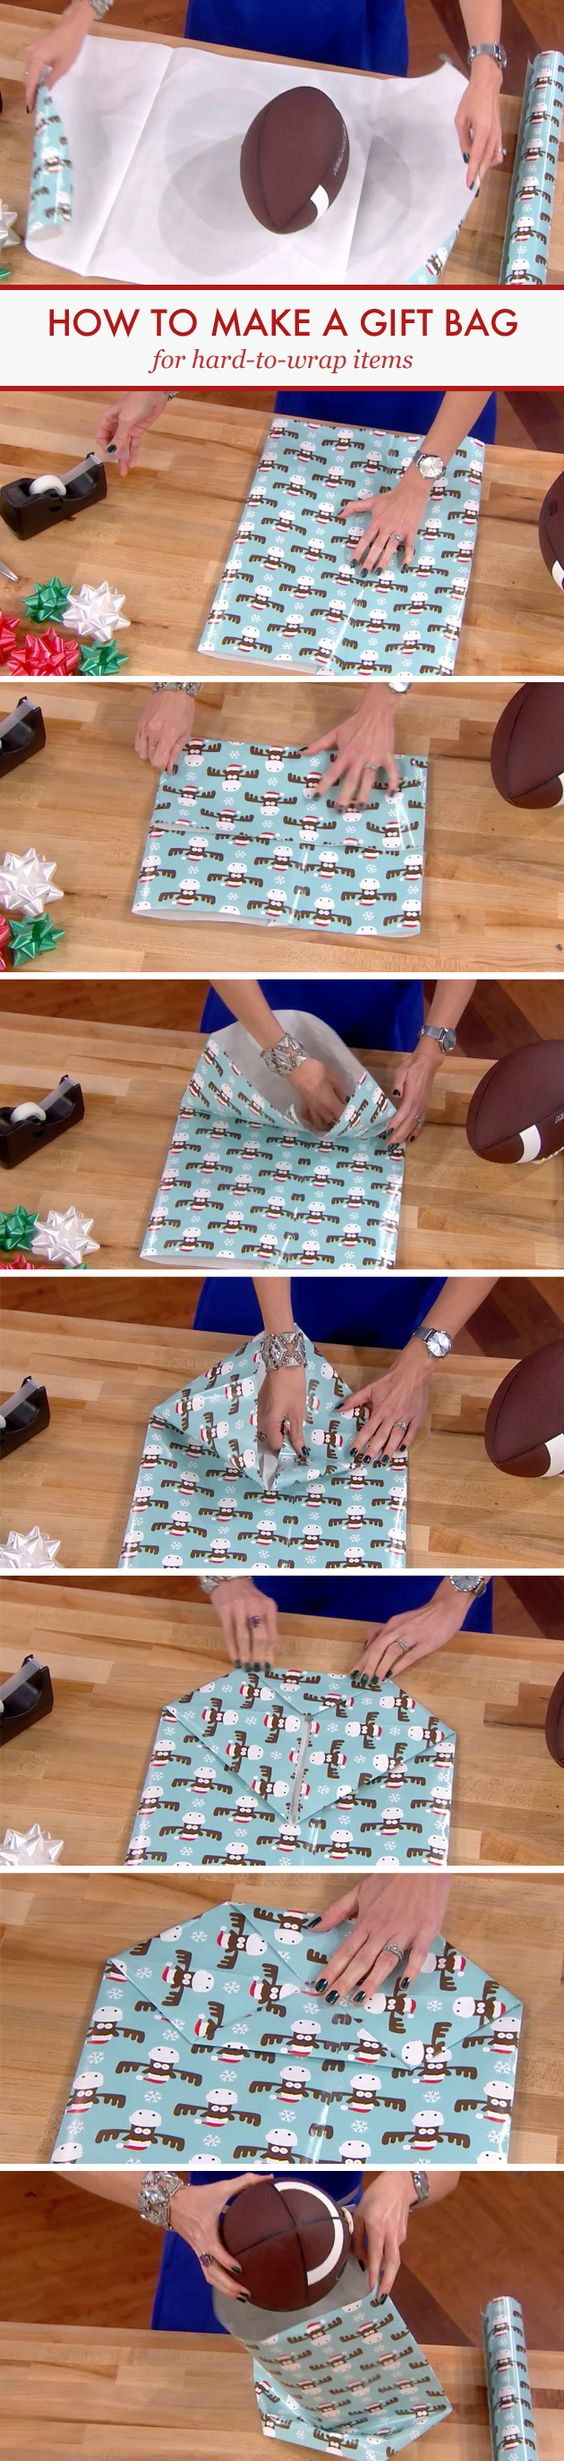 DIY Gift Bags for Hard-To-Wrap Items. 